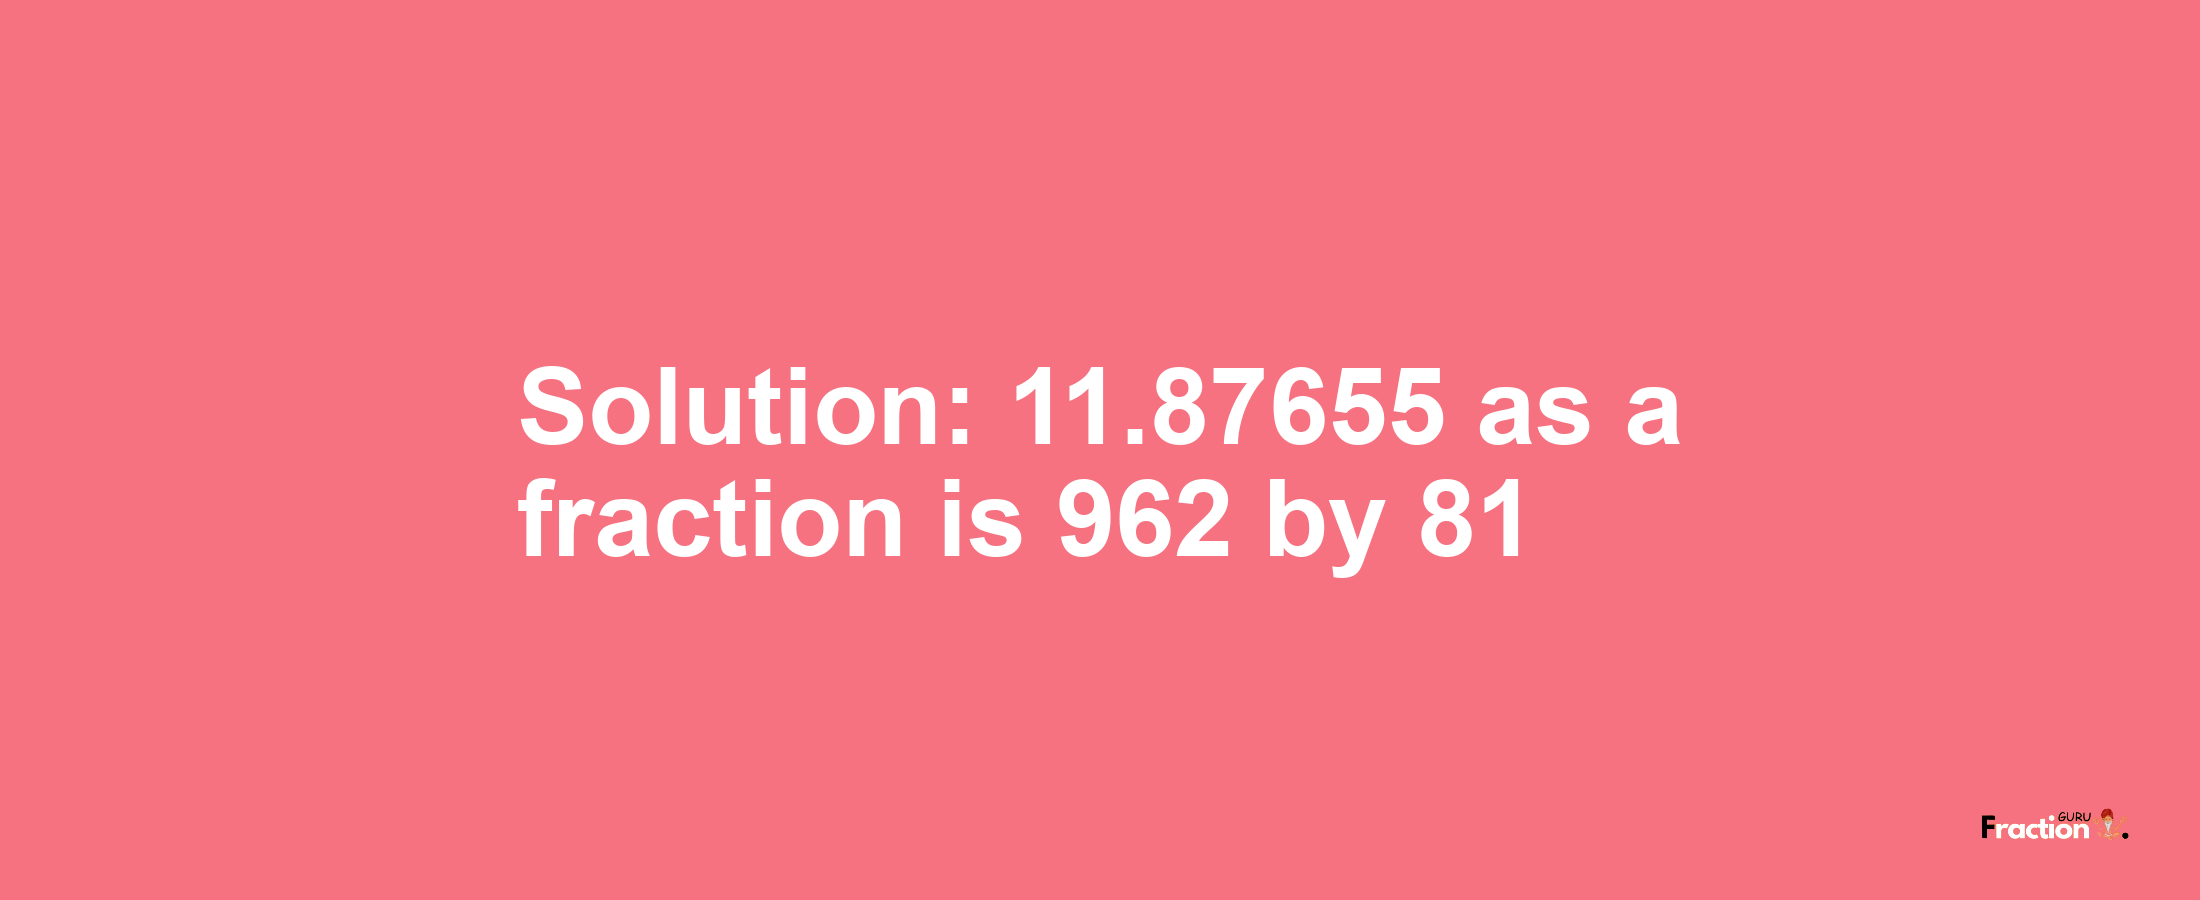 Solution:11.87655 as a fraction is 962/81